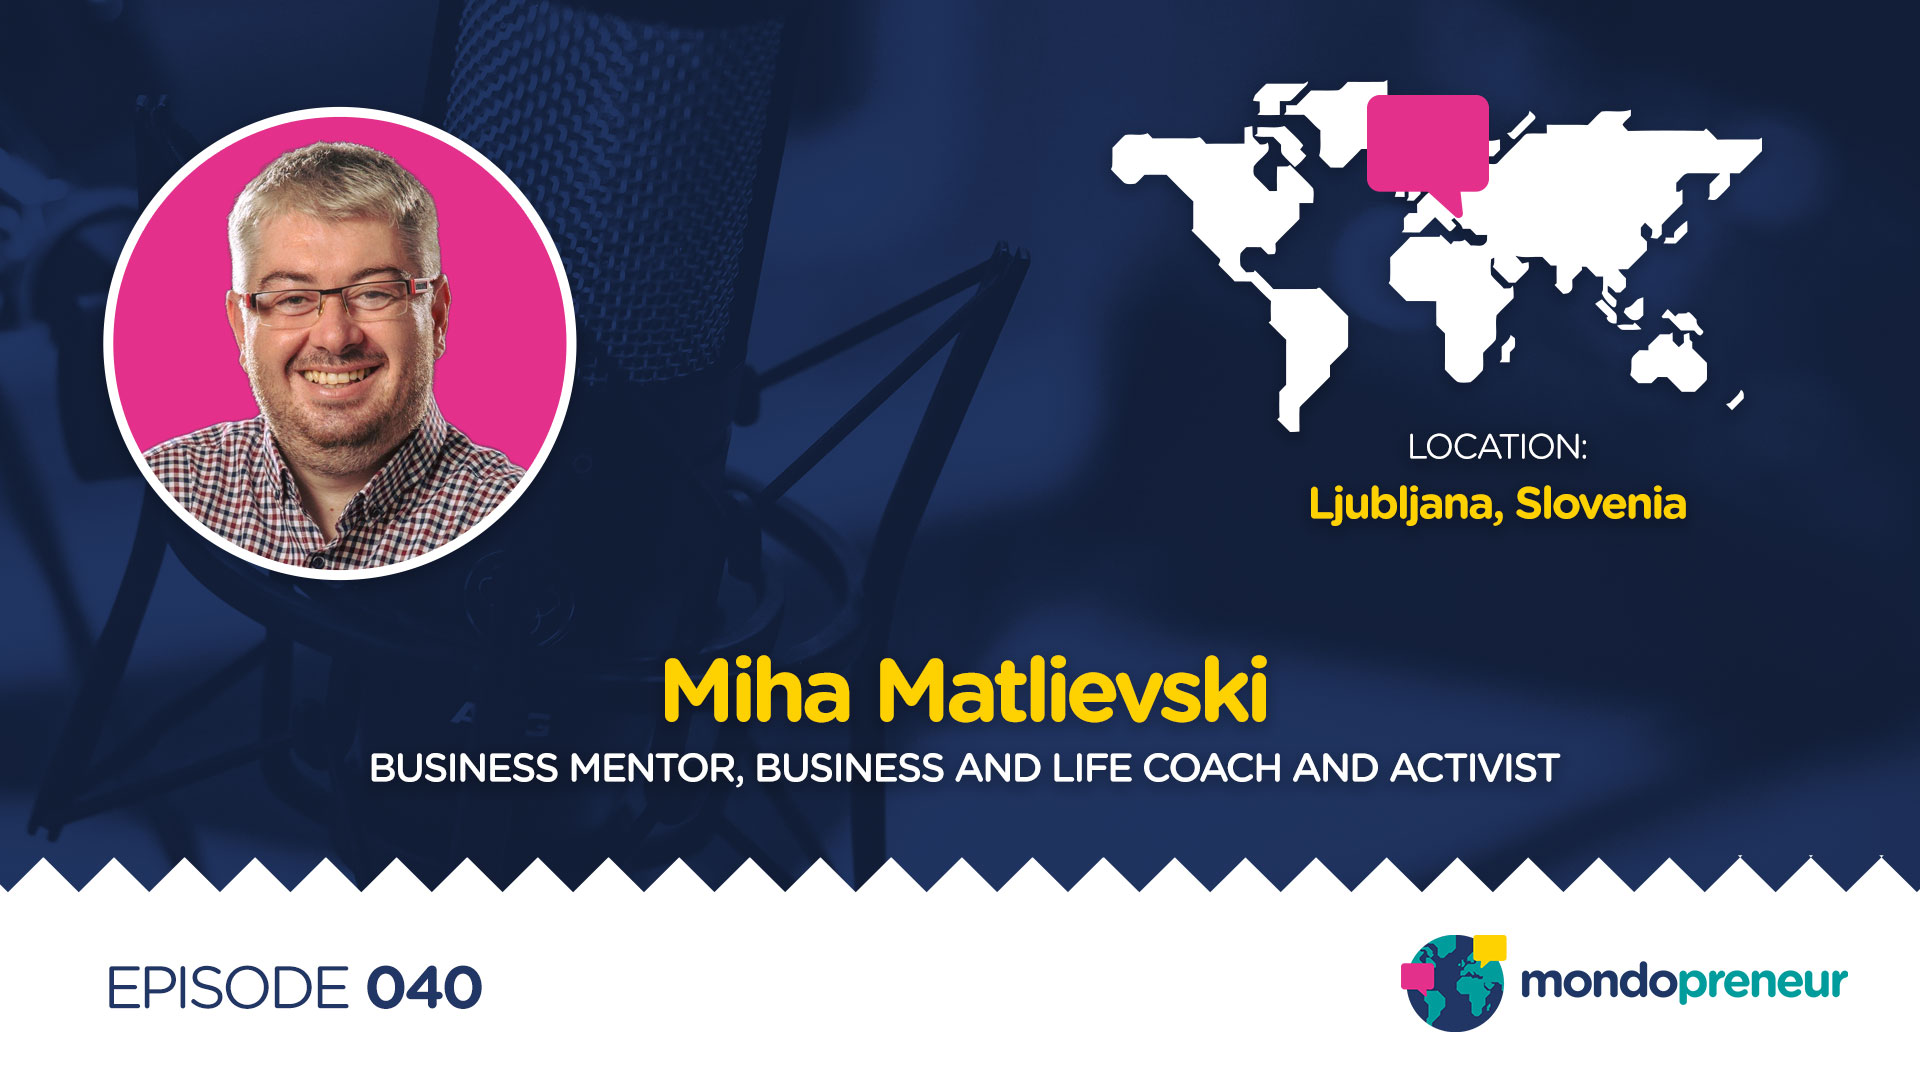 EP040: Miha Matlievski, Business Mentor, Business and Life Coach and Activist from Slovenia